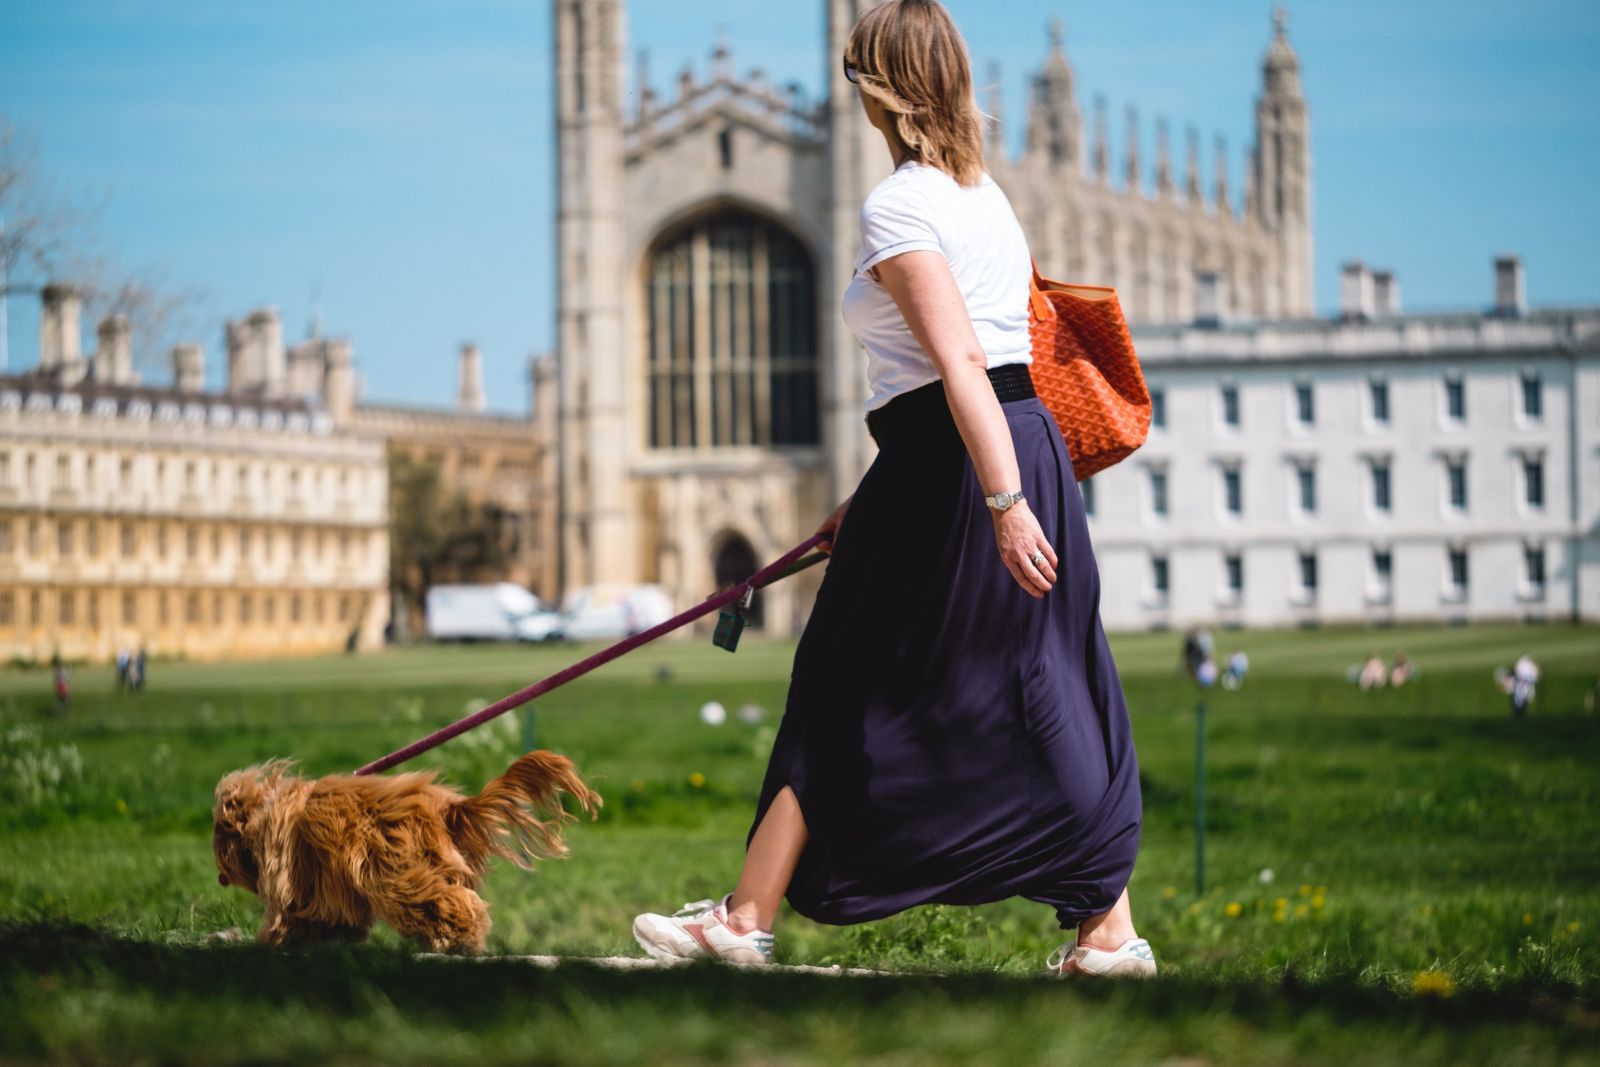 Bringing your pet to college - Dog walking on campus